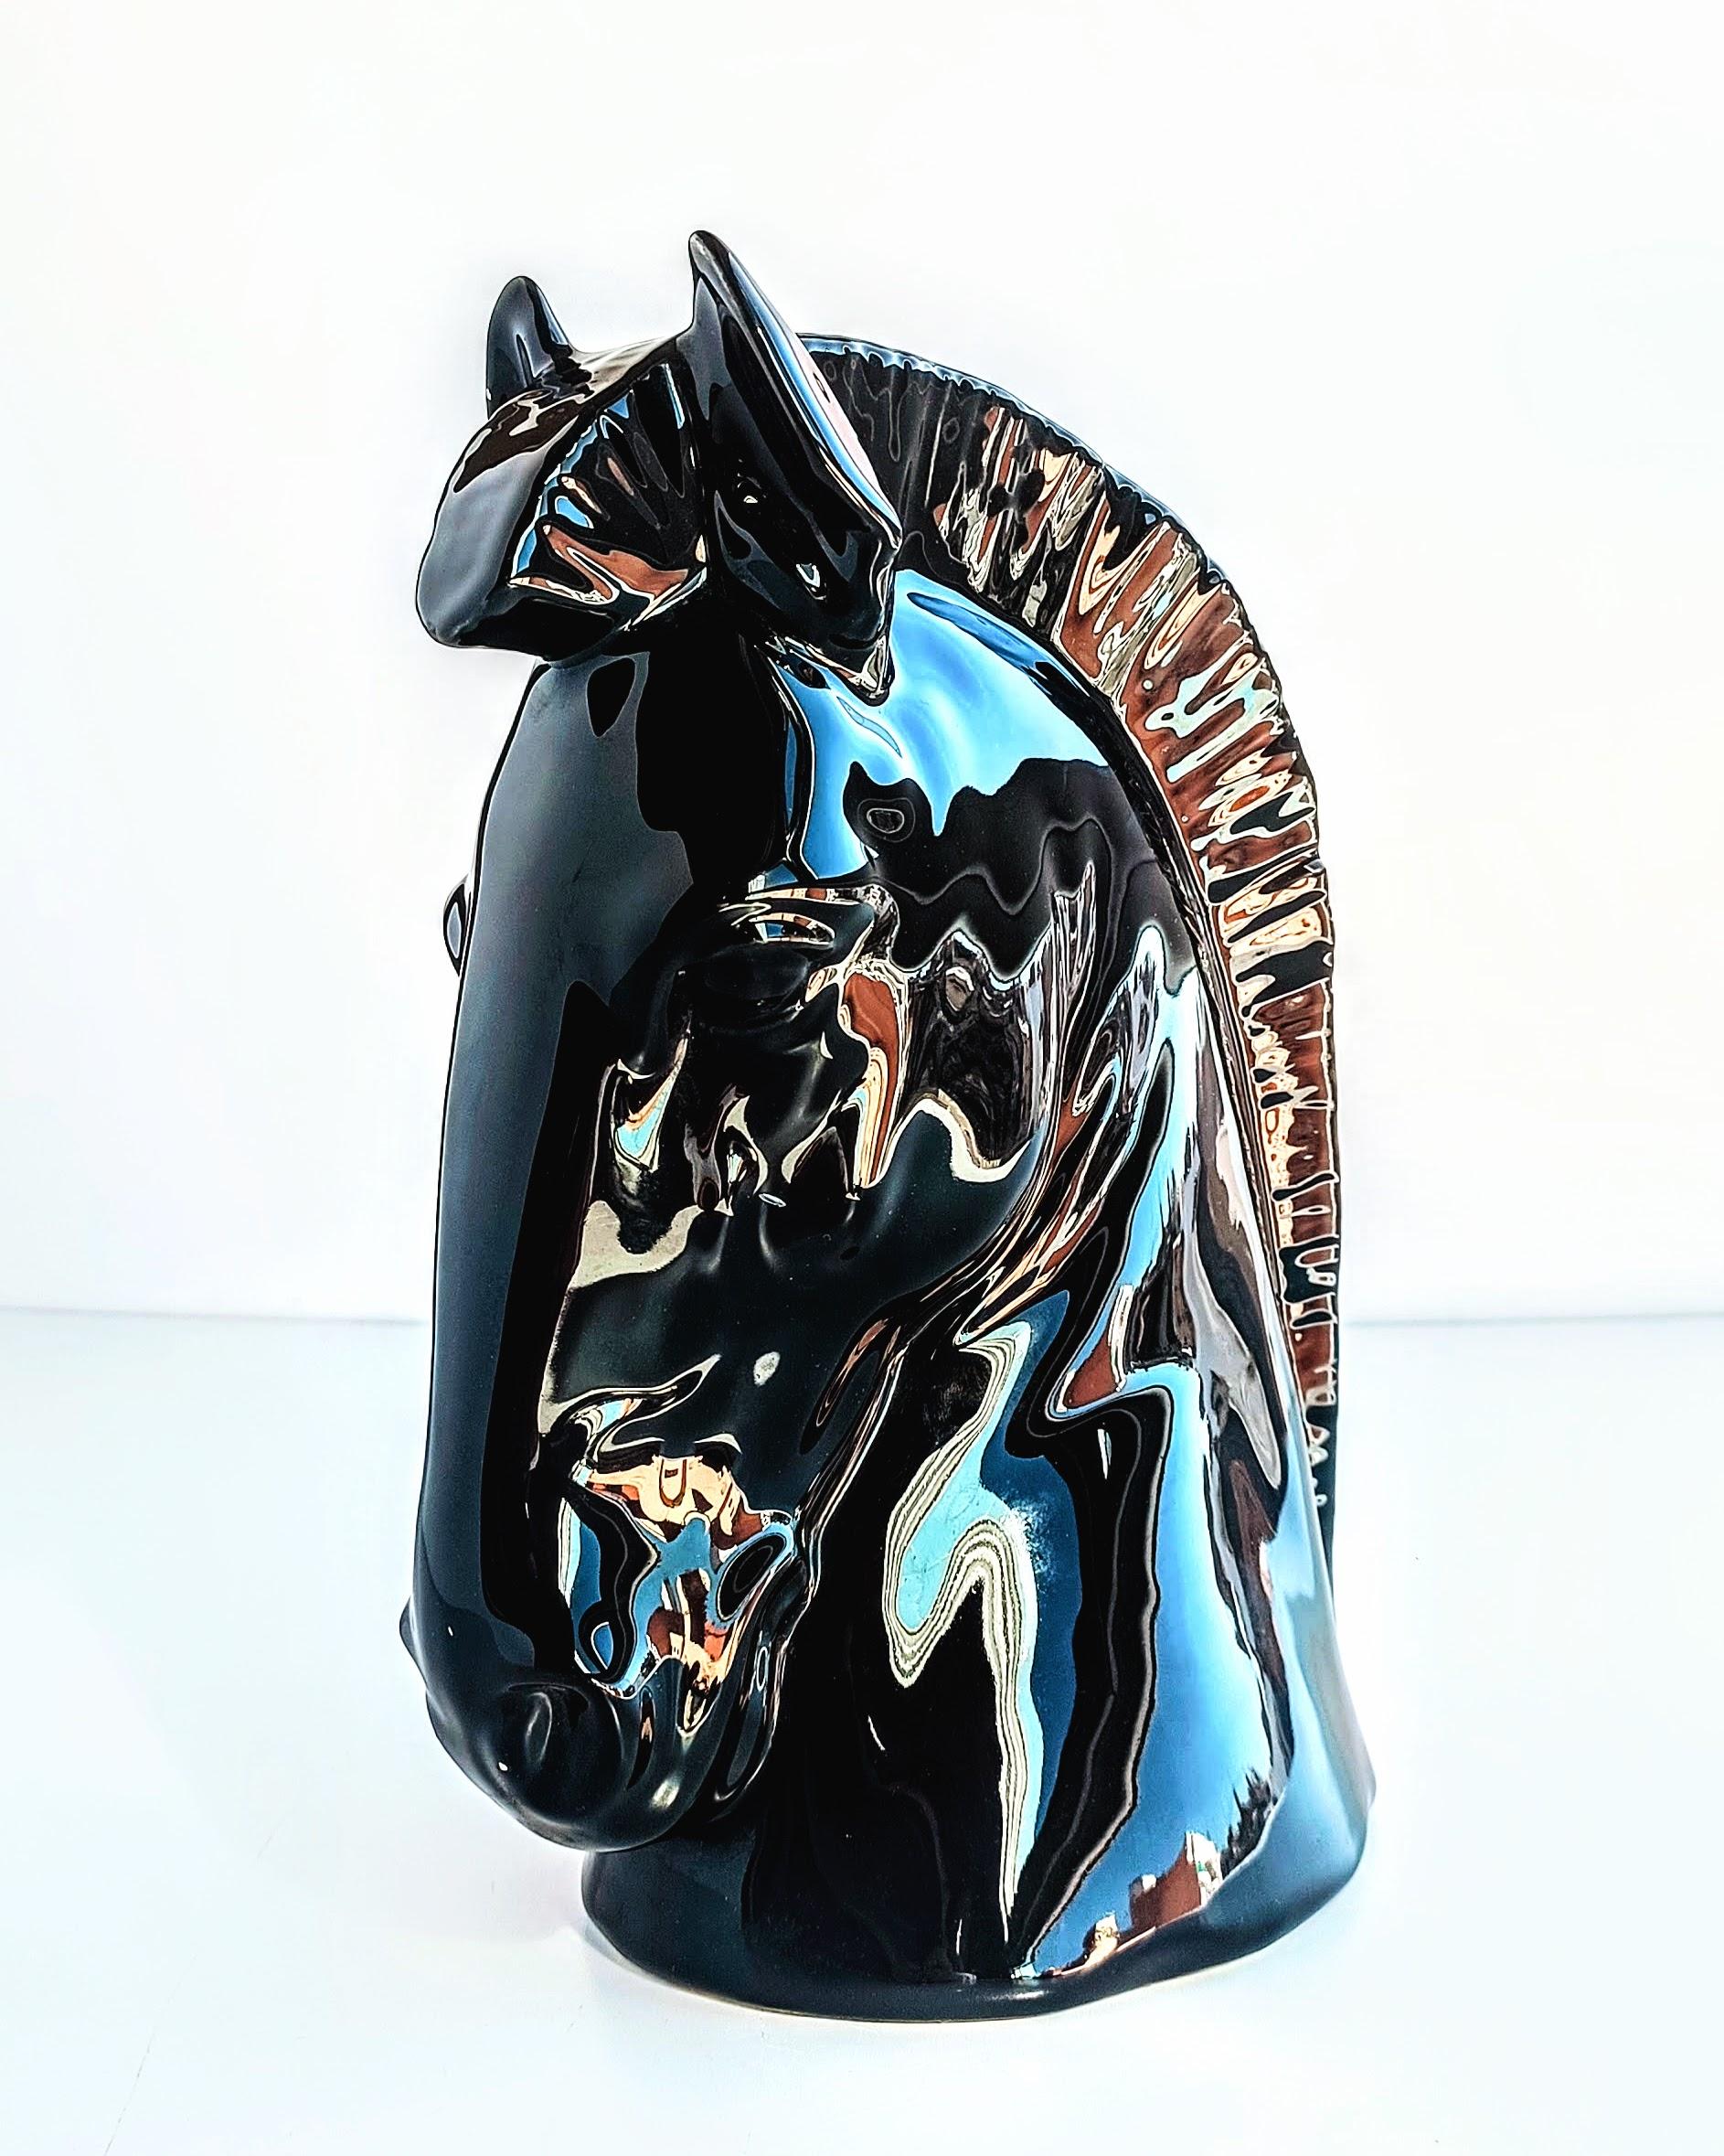 Stunning black glaze ceramic head horse sculpture hand produced in the Cases workshop in the Manises town of Valencia, Spain. 

Measurements:

Height 23cm/ 9in
Width 17cm/ 6.7in
Weight 825gr.

Manises ceramics are highly prestigious in Spain and all